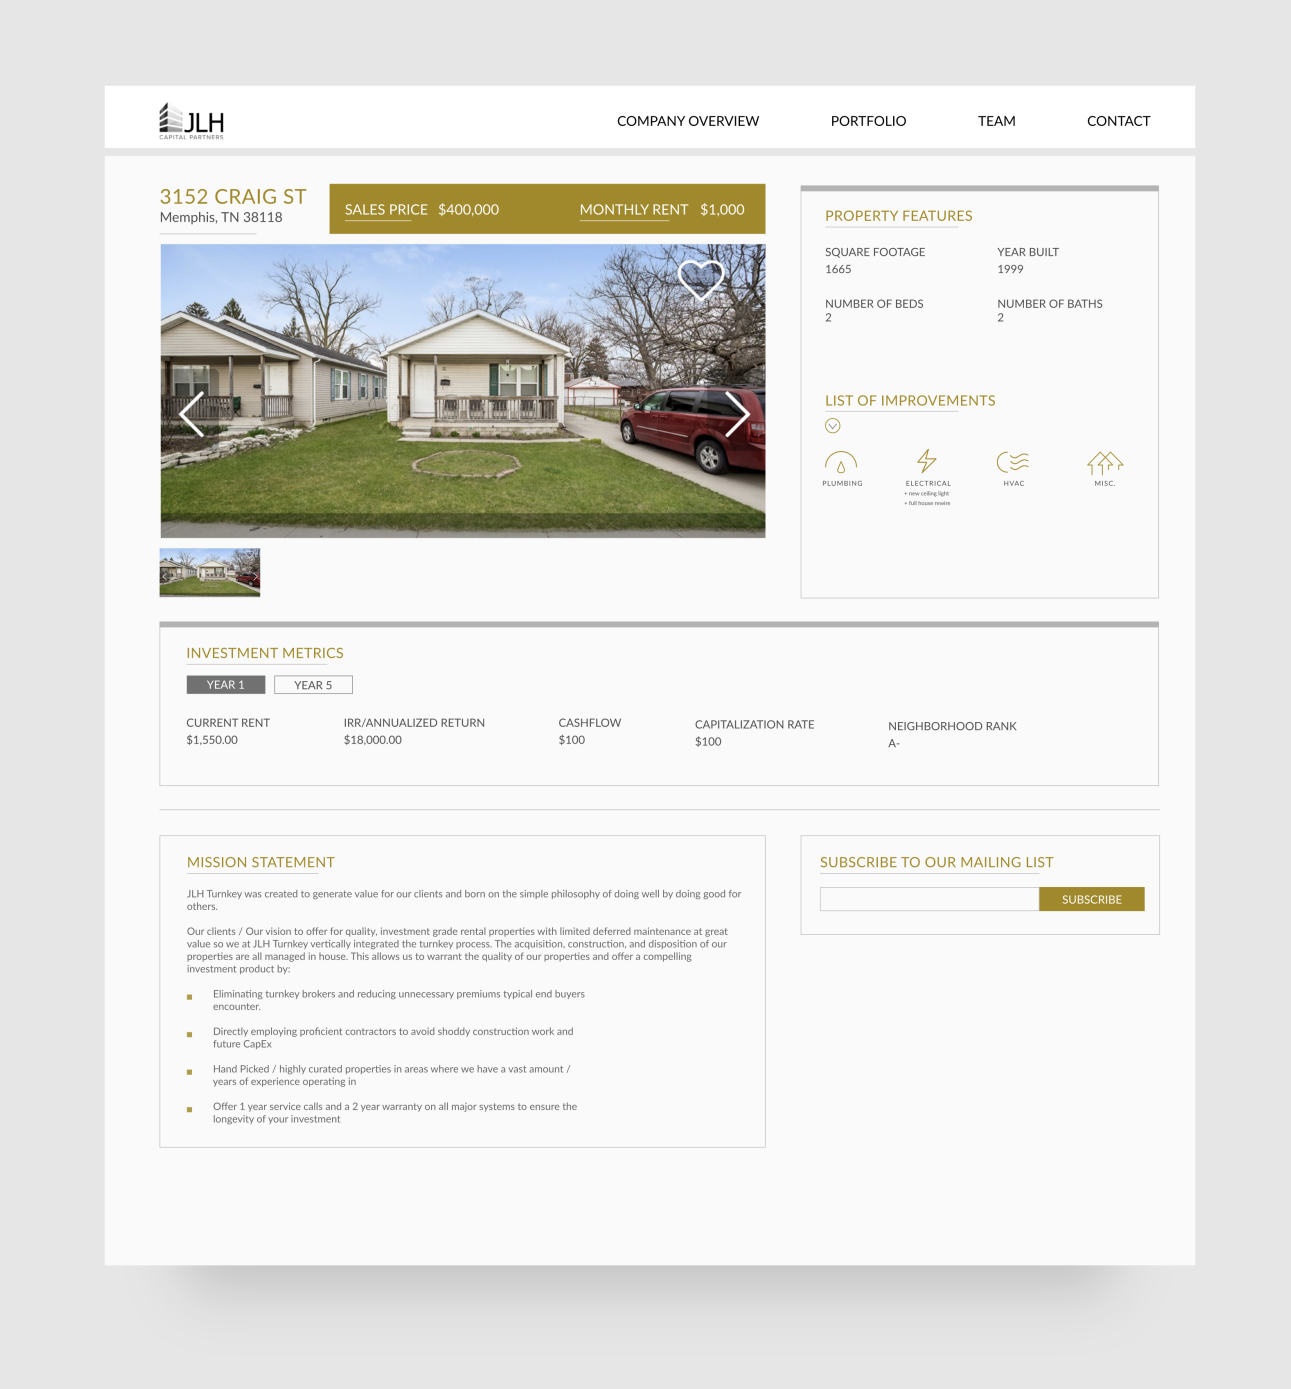 Web design for JLH Capital Partners. Designed by Johnery